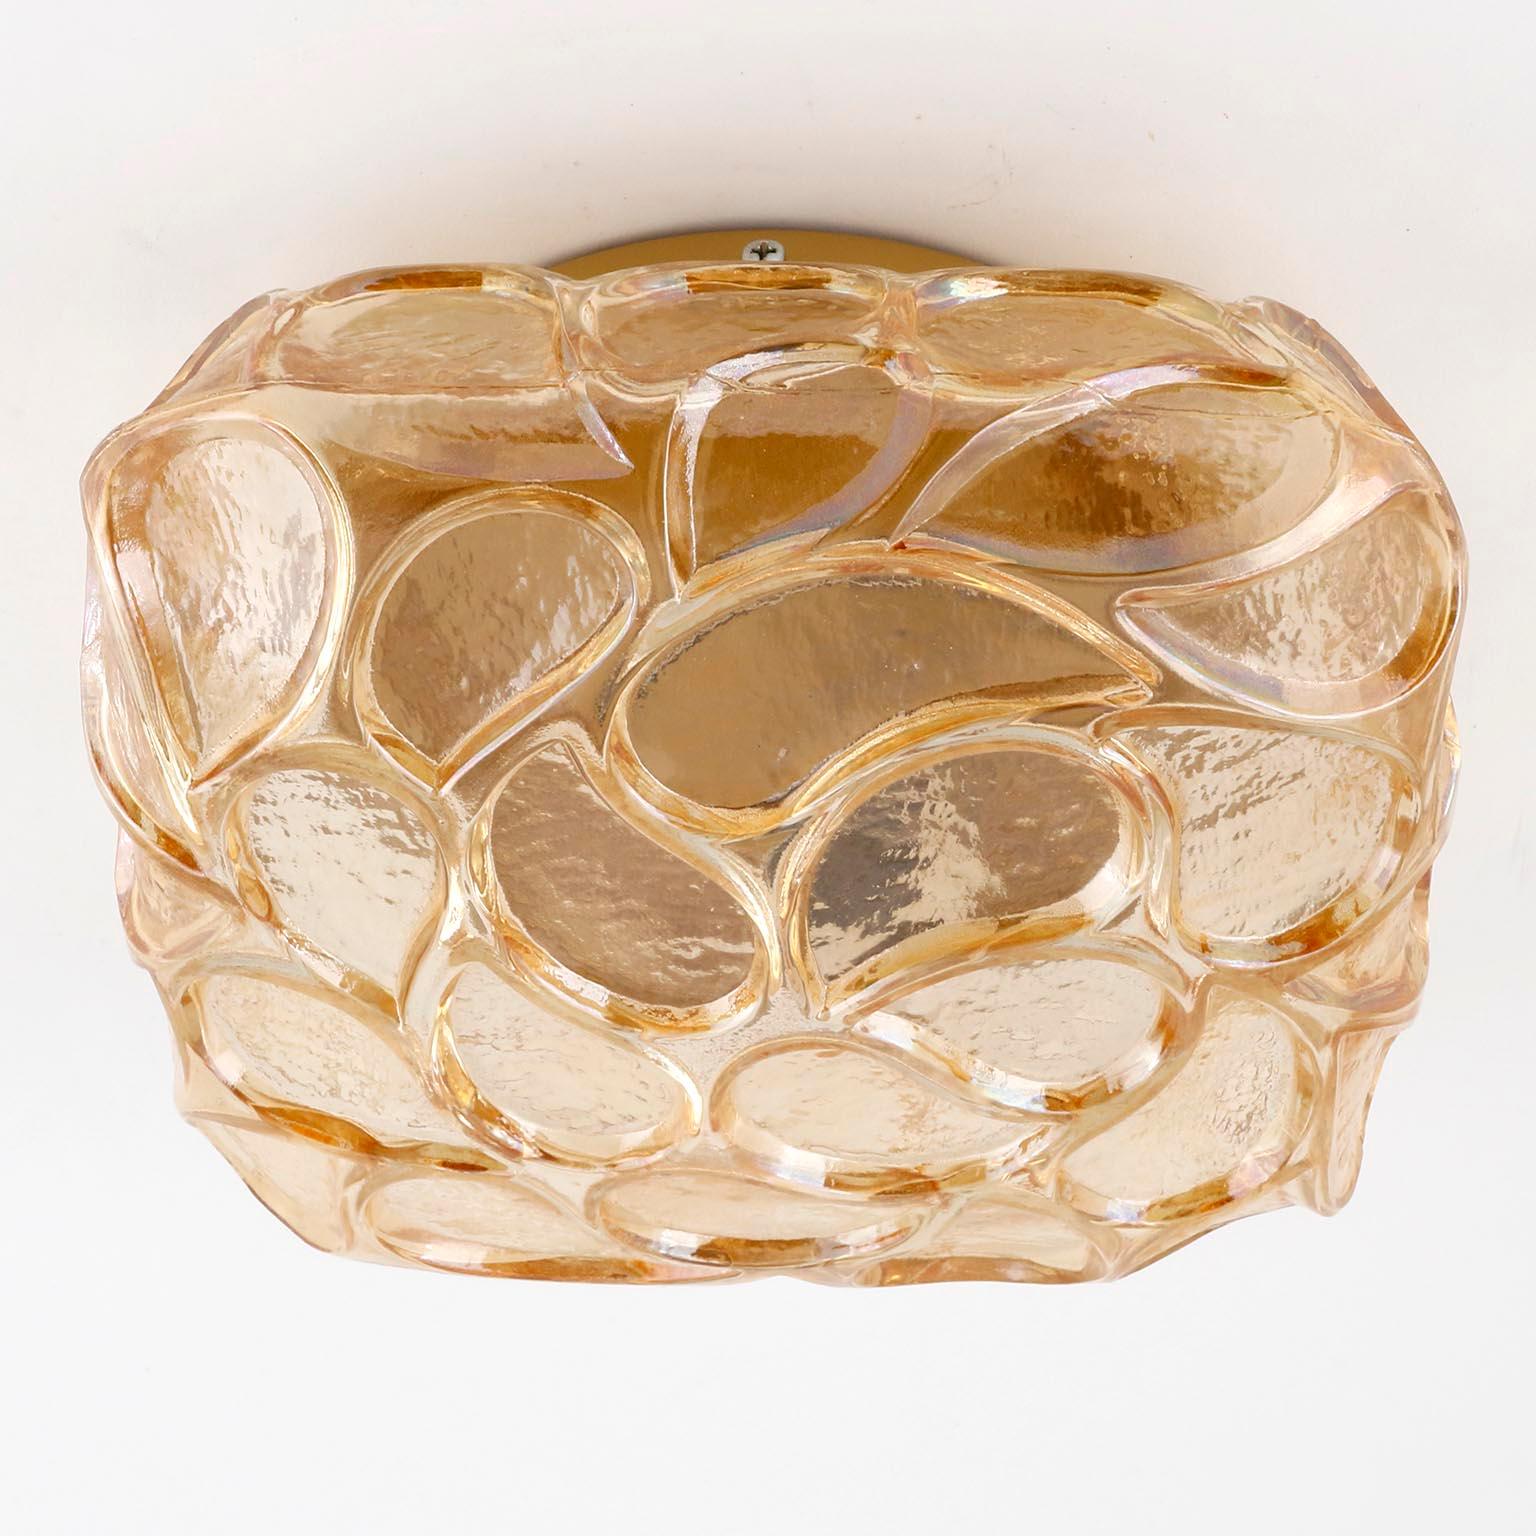 A fantastic square textured glass light fixture, manufactured in Germany in midcentury, circa 1970 (late 1960s or early 1970s).
An amber, yellow, orange, honey, champagne toned textured glass with Paisley pattern is mounted on a golden or brass